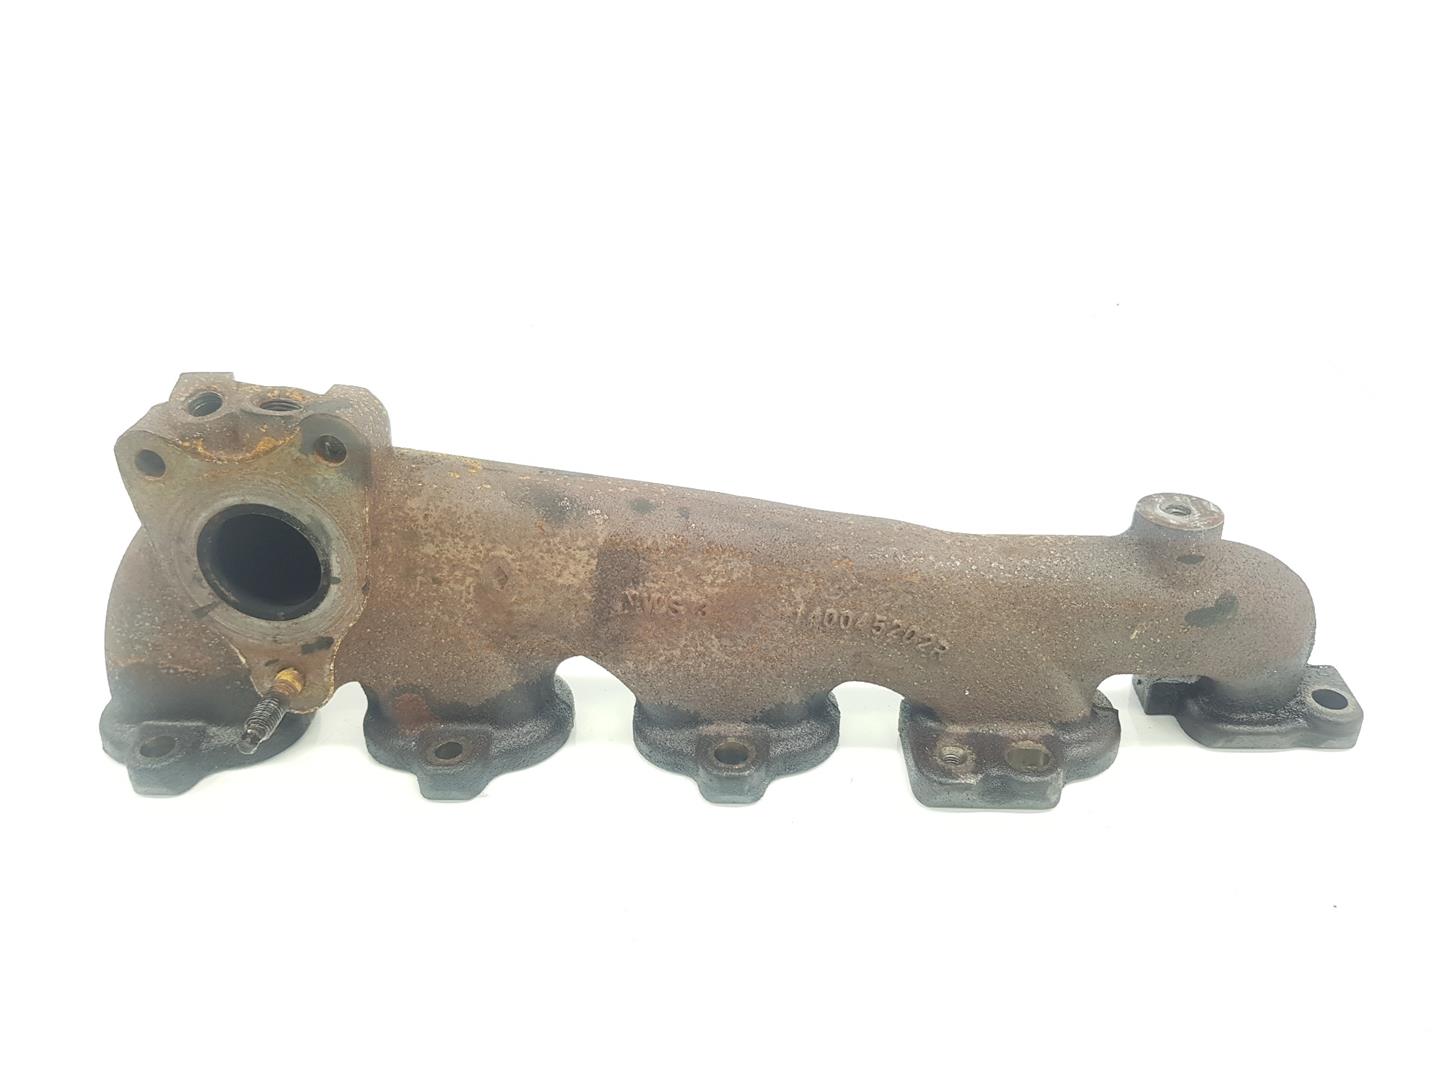 RENAULT Trafic 2 generation (2001-2015) Exhaust Manifold 140045202R, 140045202R, 1111AA 23799032